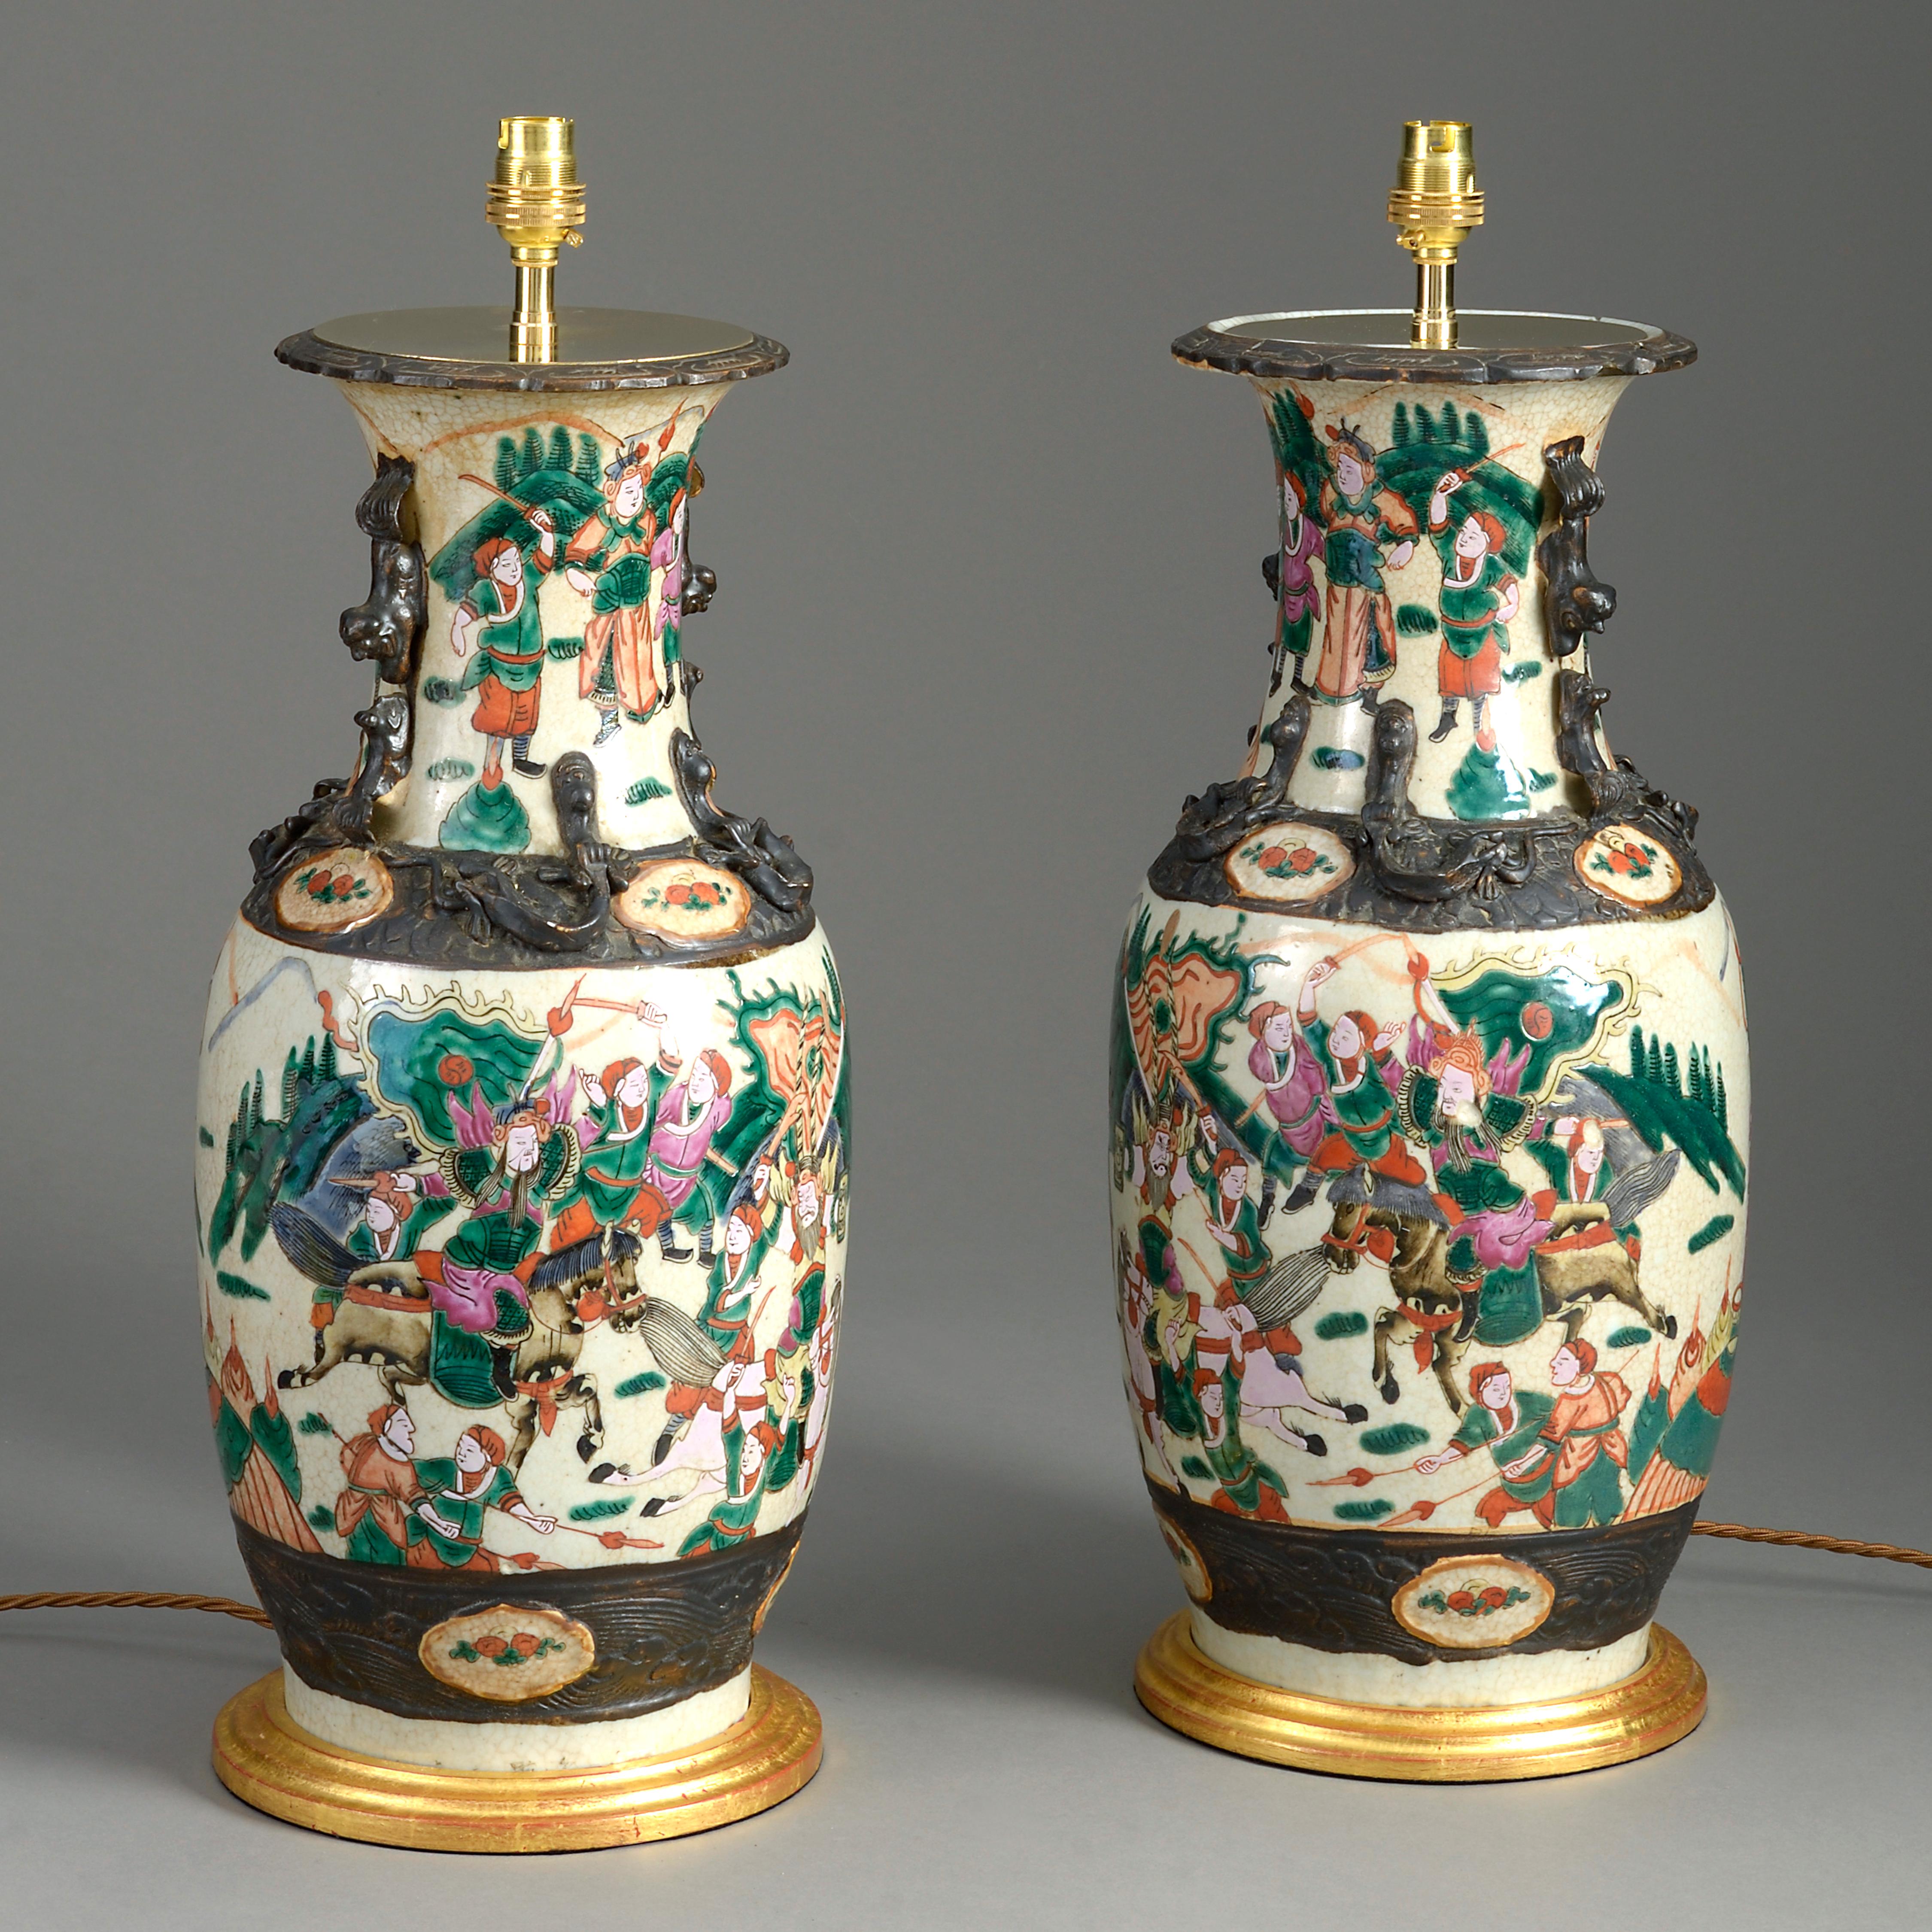 A late 19th century pair of famille verte porcelain vases, decorated throughout with figurative battle scenes. Now mounted on turned giltwood bases as lamps.

Height dimensions refer to combined height of vases and giltwood bases only.

Wired